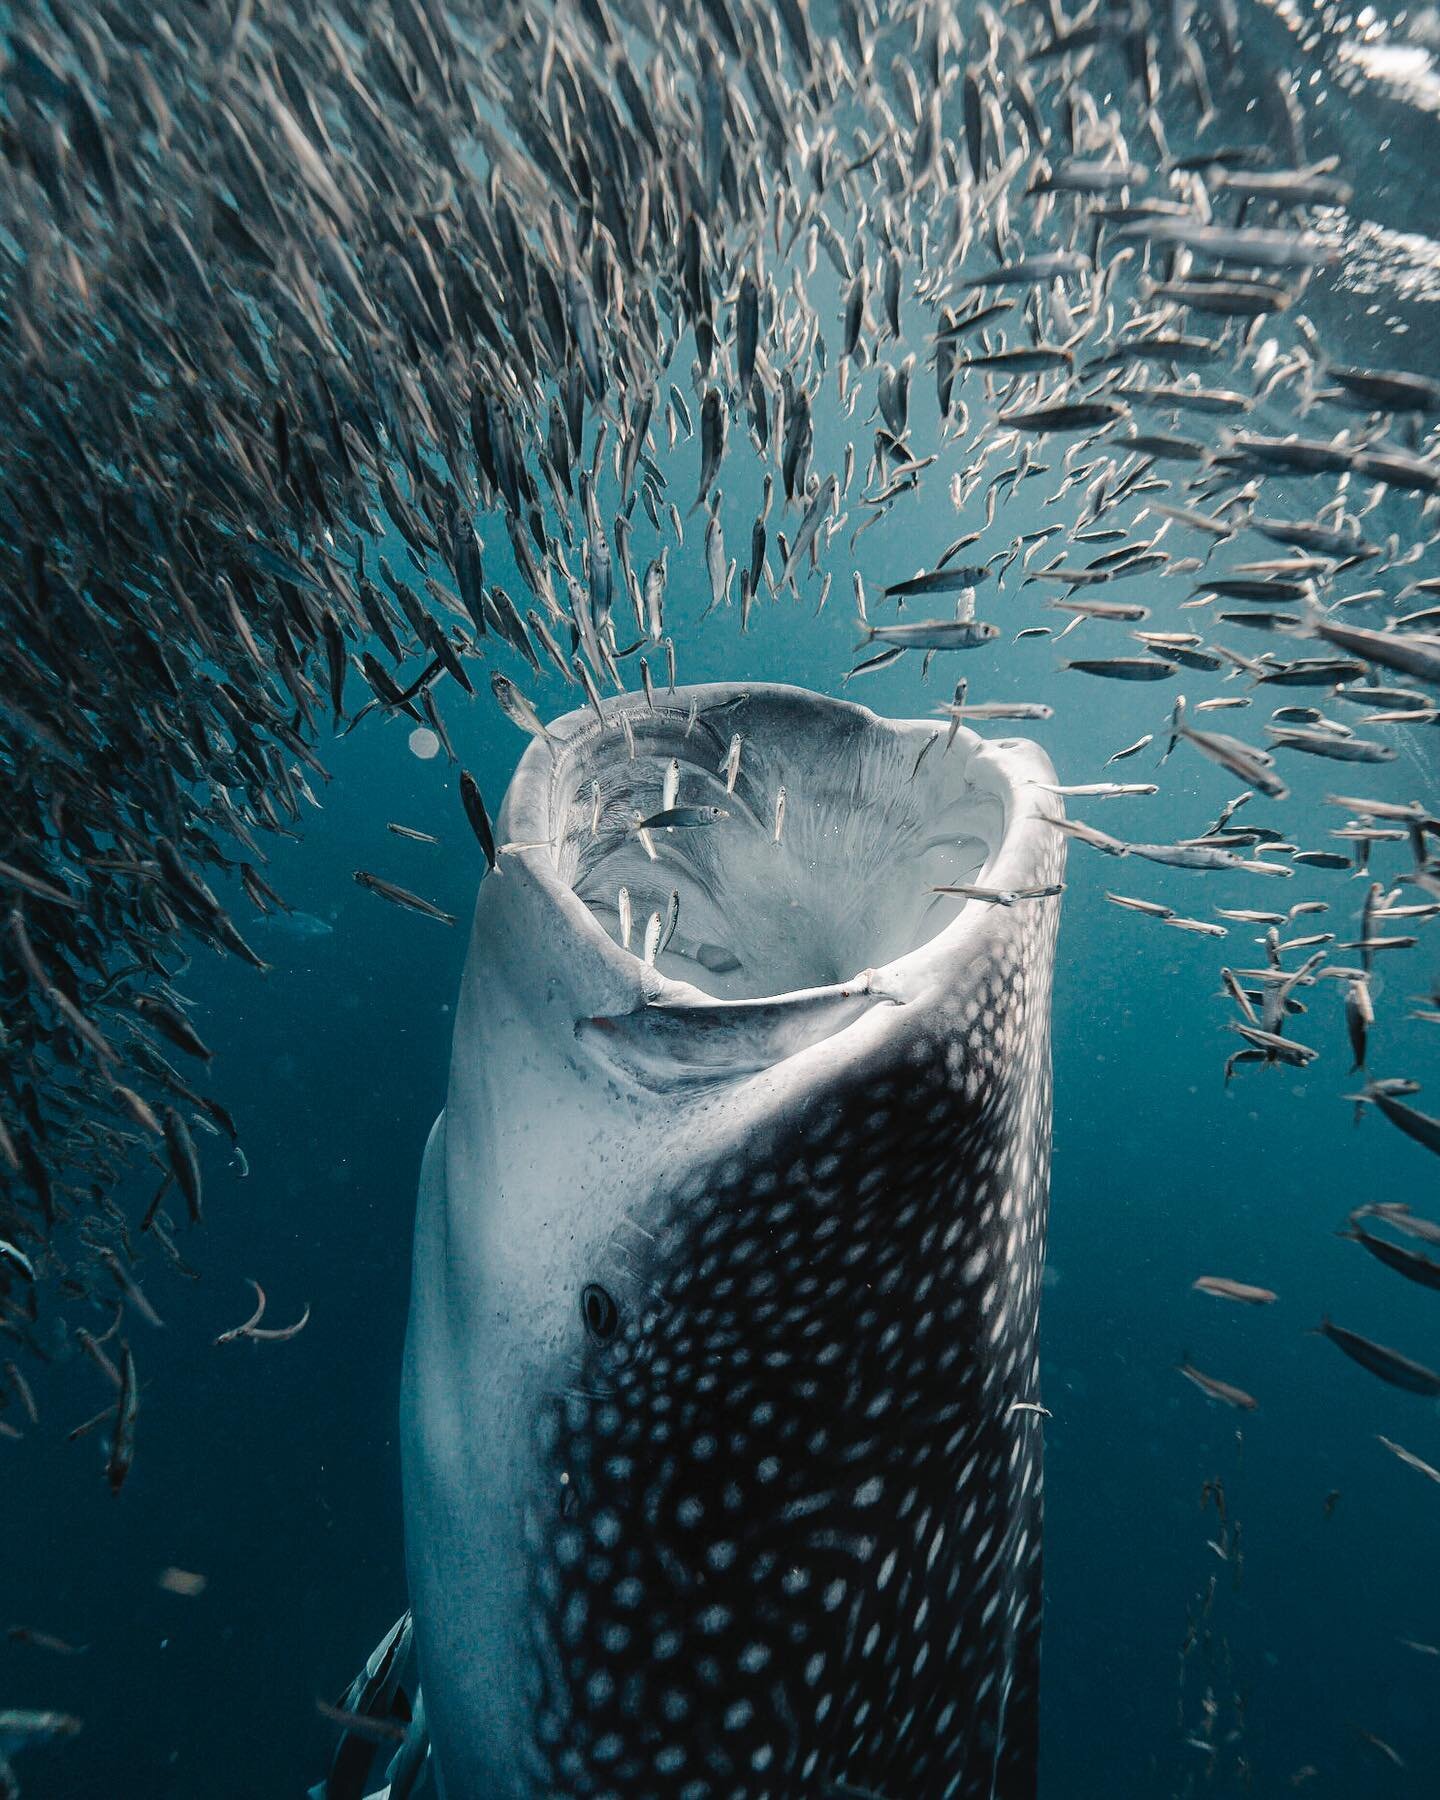 Whale sharks mouths can stretch to around 4 feet wide, you see I learned this the hard way a few years back when one swallowed my arm. Before I begin this story I must give you a general understanding of whale sharks. They are REALLY big, on average 